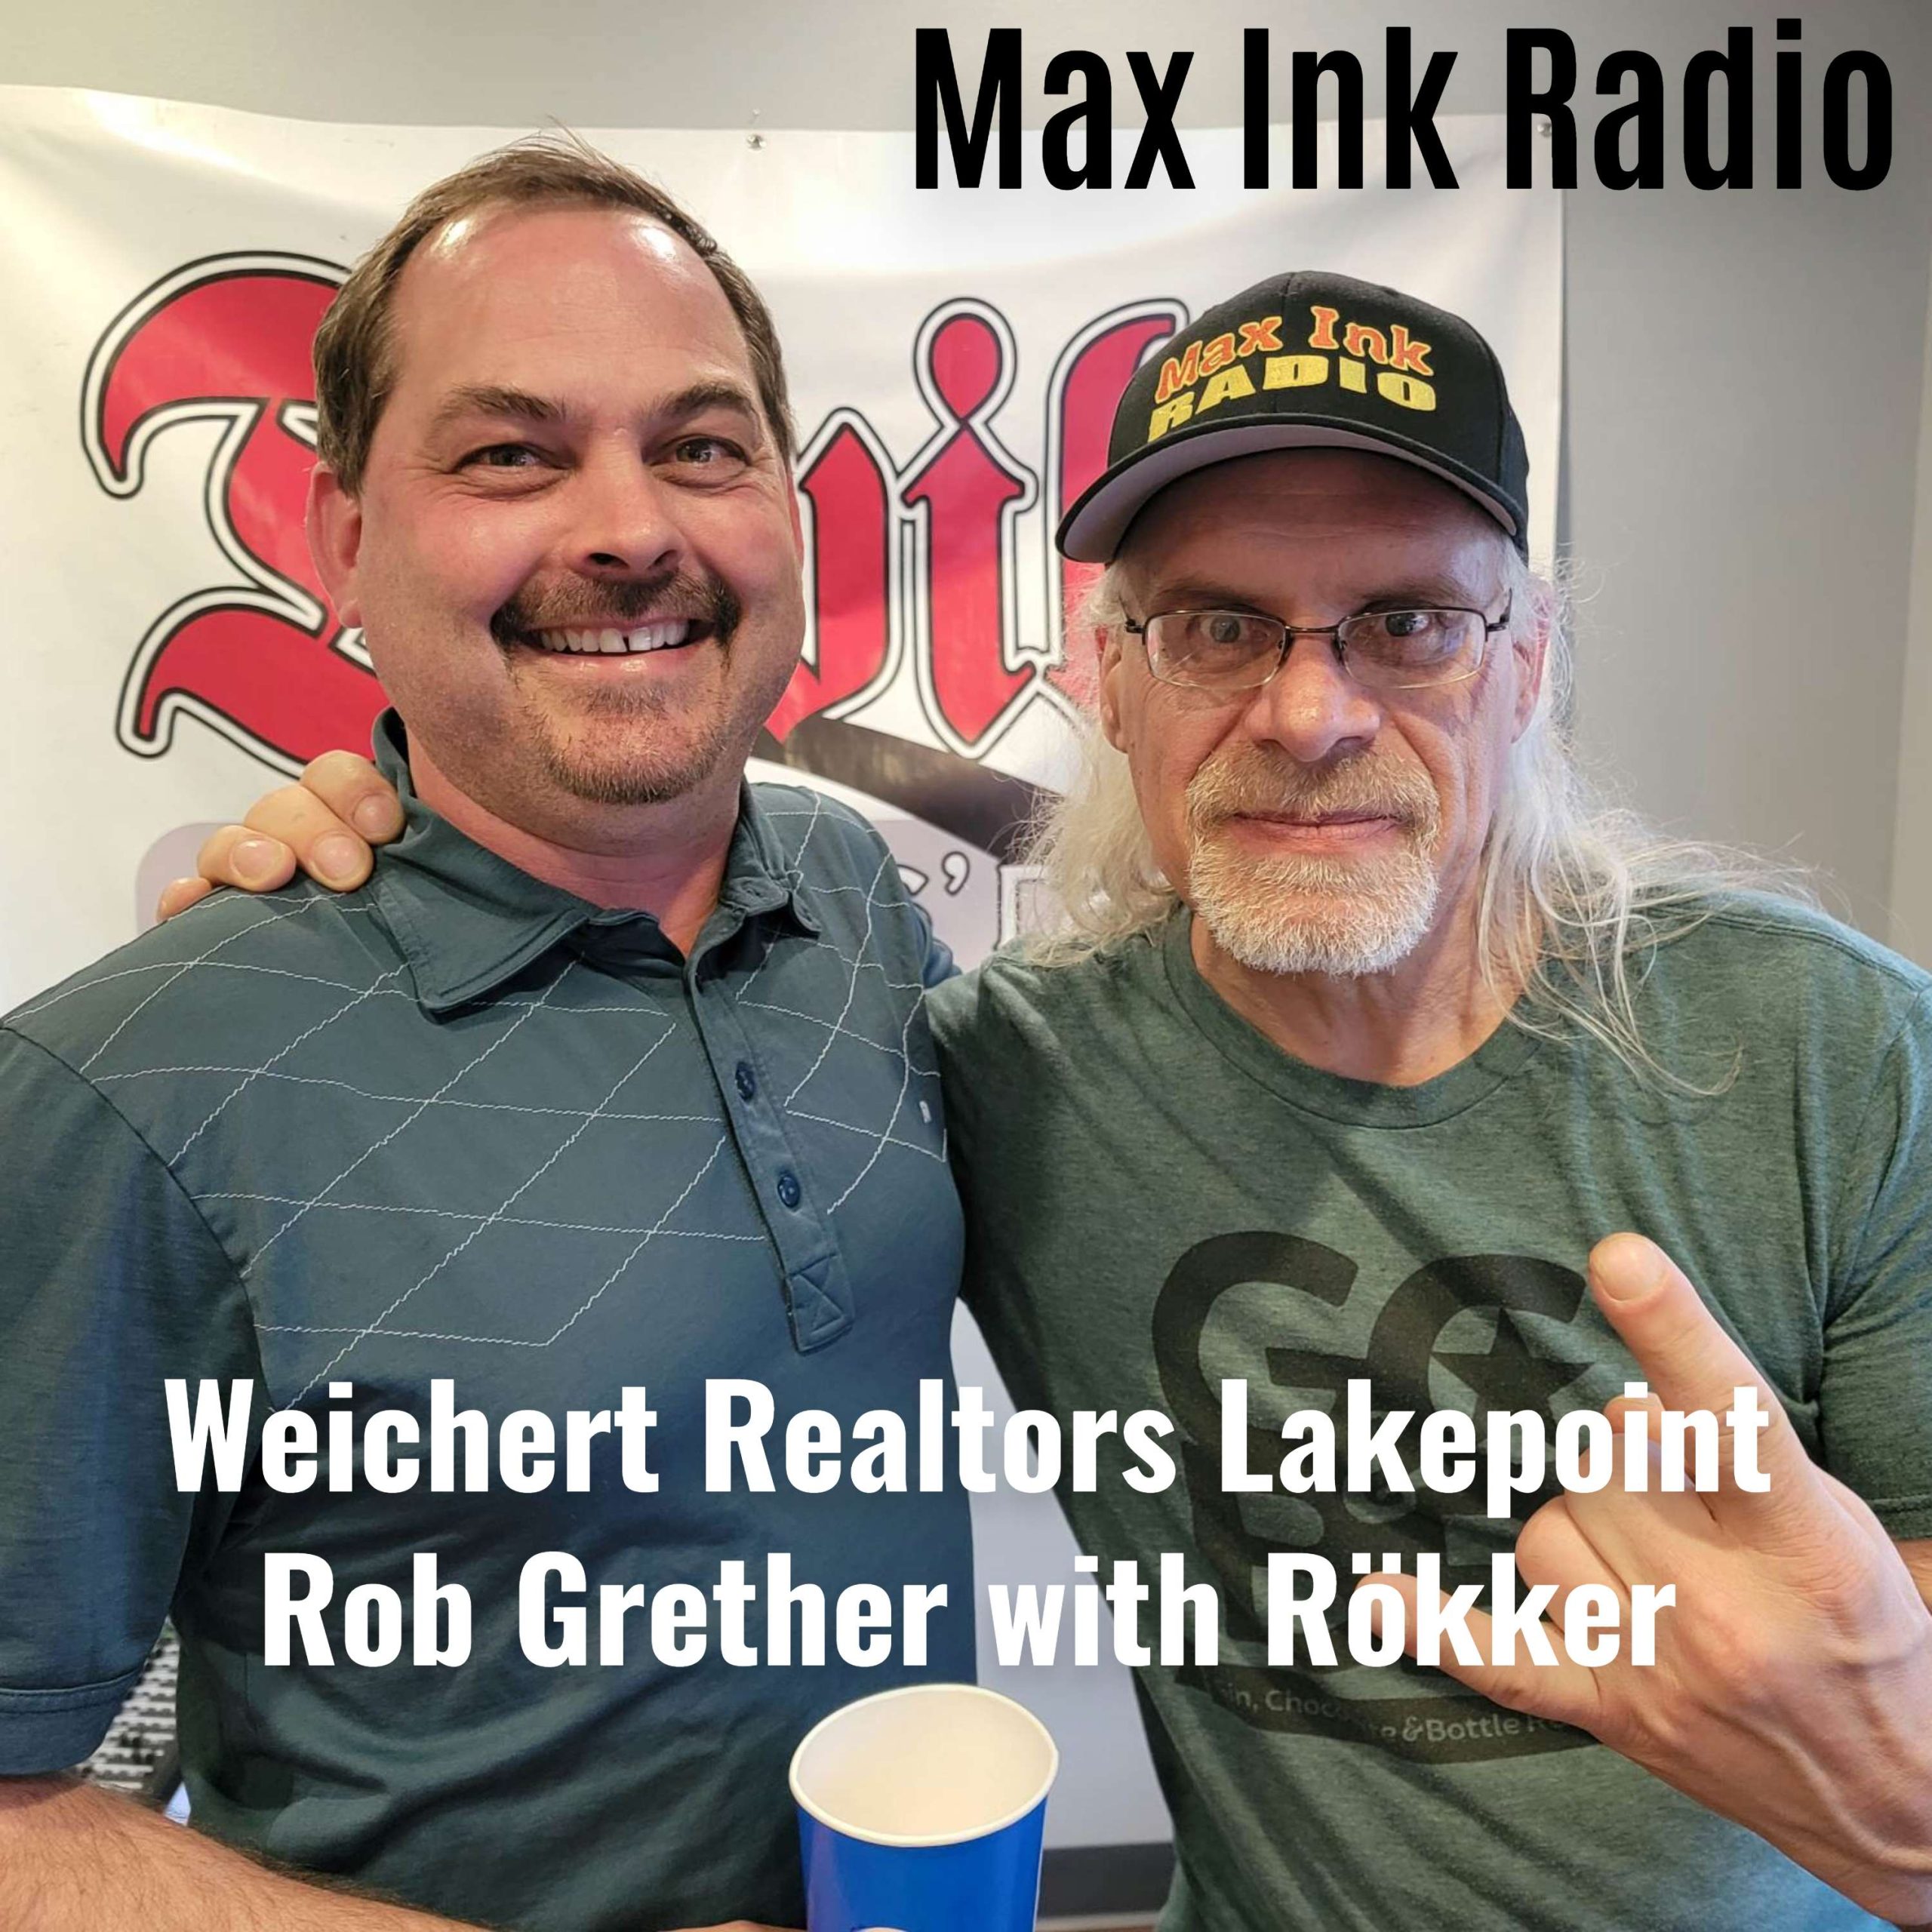 Rob Grether of Weichert Realtors Lakepoint with Rökker